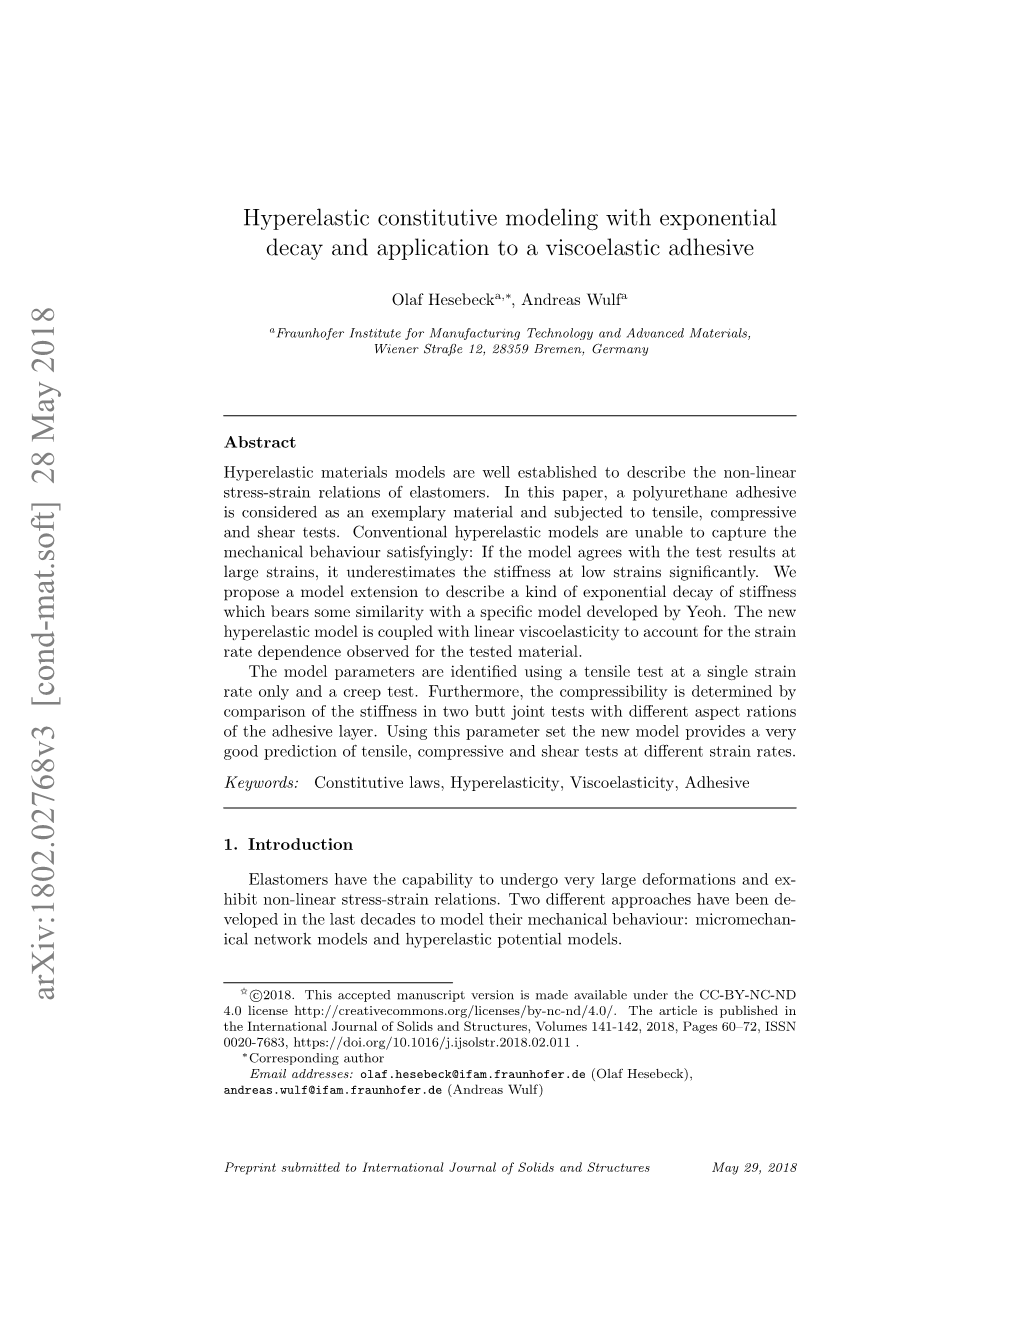 Hyperelastic Constitutive Modeling with Exponential Decay and Application to a Viscoelastic Adhesive